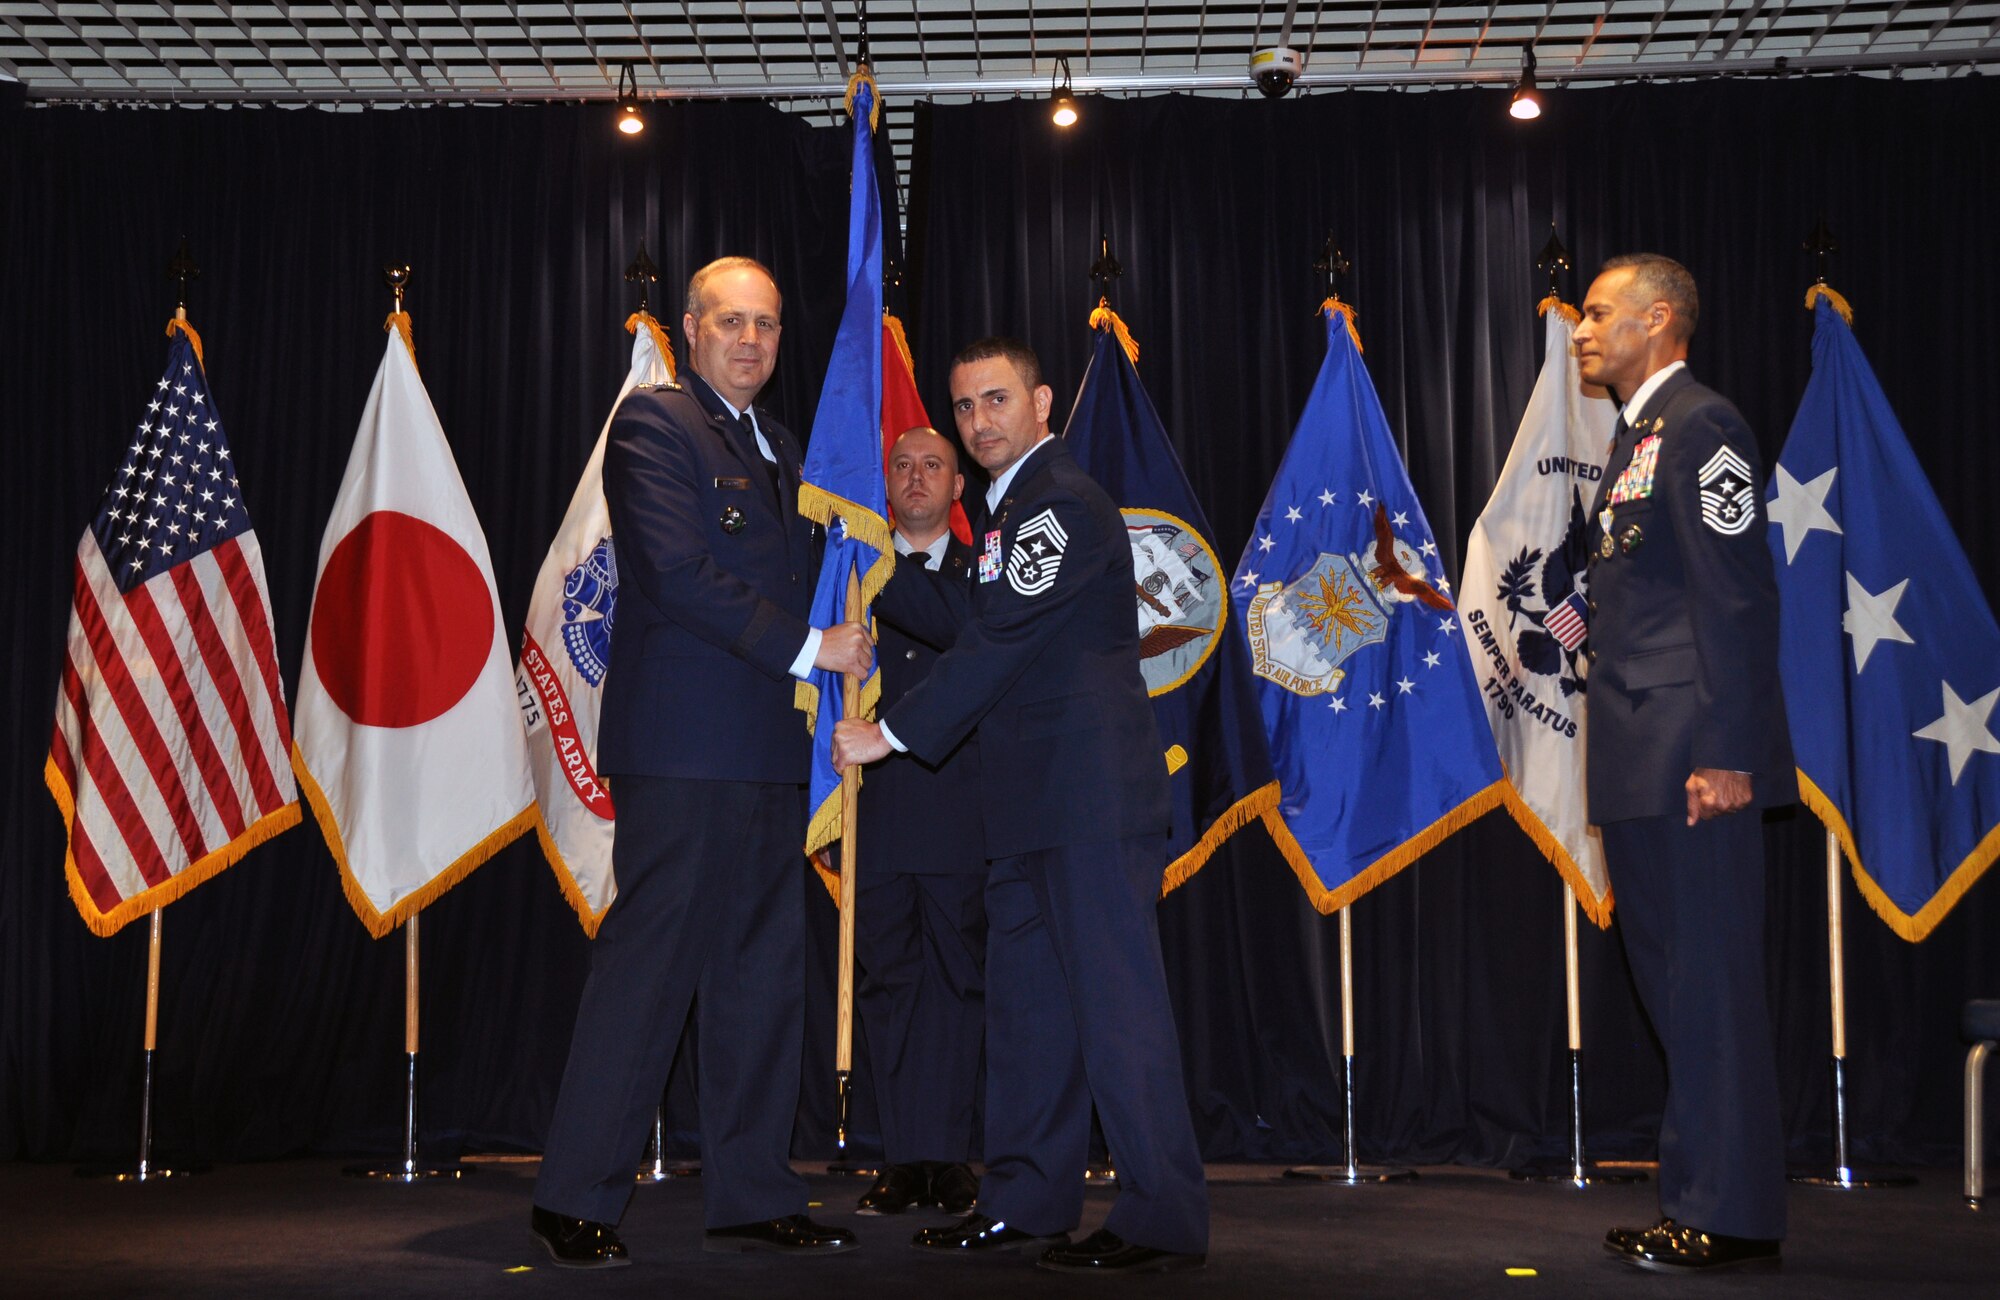 Chief Master Sgt. Terrence Greene, who served dual-hatted as the USFJ Senior Enlisted Leader and 5th Air Force Command Chief, relinquished his responsibilities to Chief Master Sgt. Richard Winegardner Jr., who will serve as the USFJ SEL, and Chief Master Sgt. Brian Kruzelnick, who will serve as the 5th AF Command Chief.